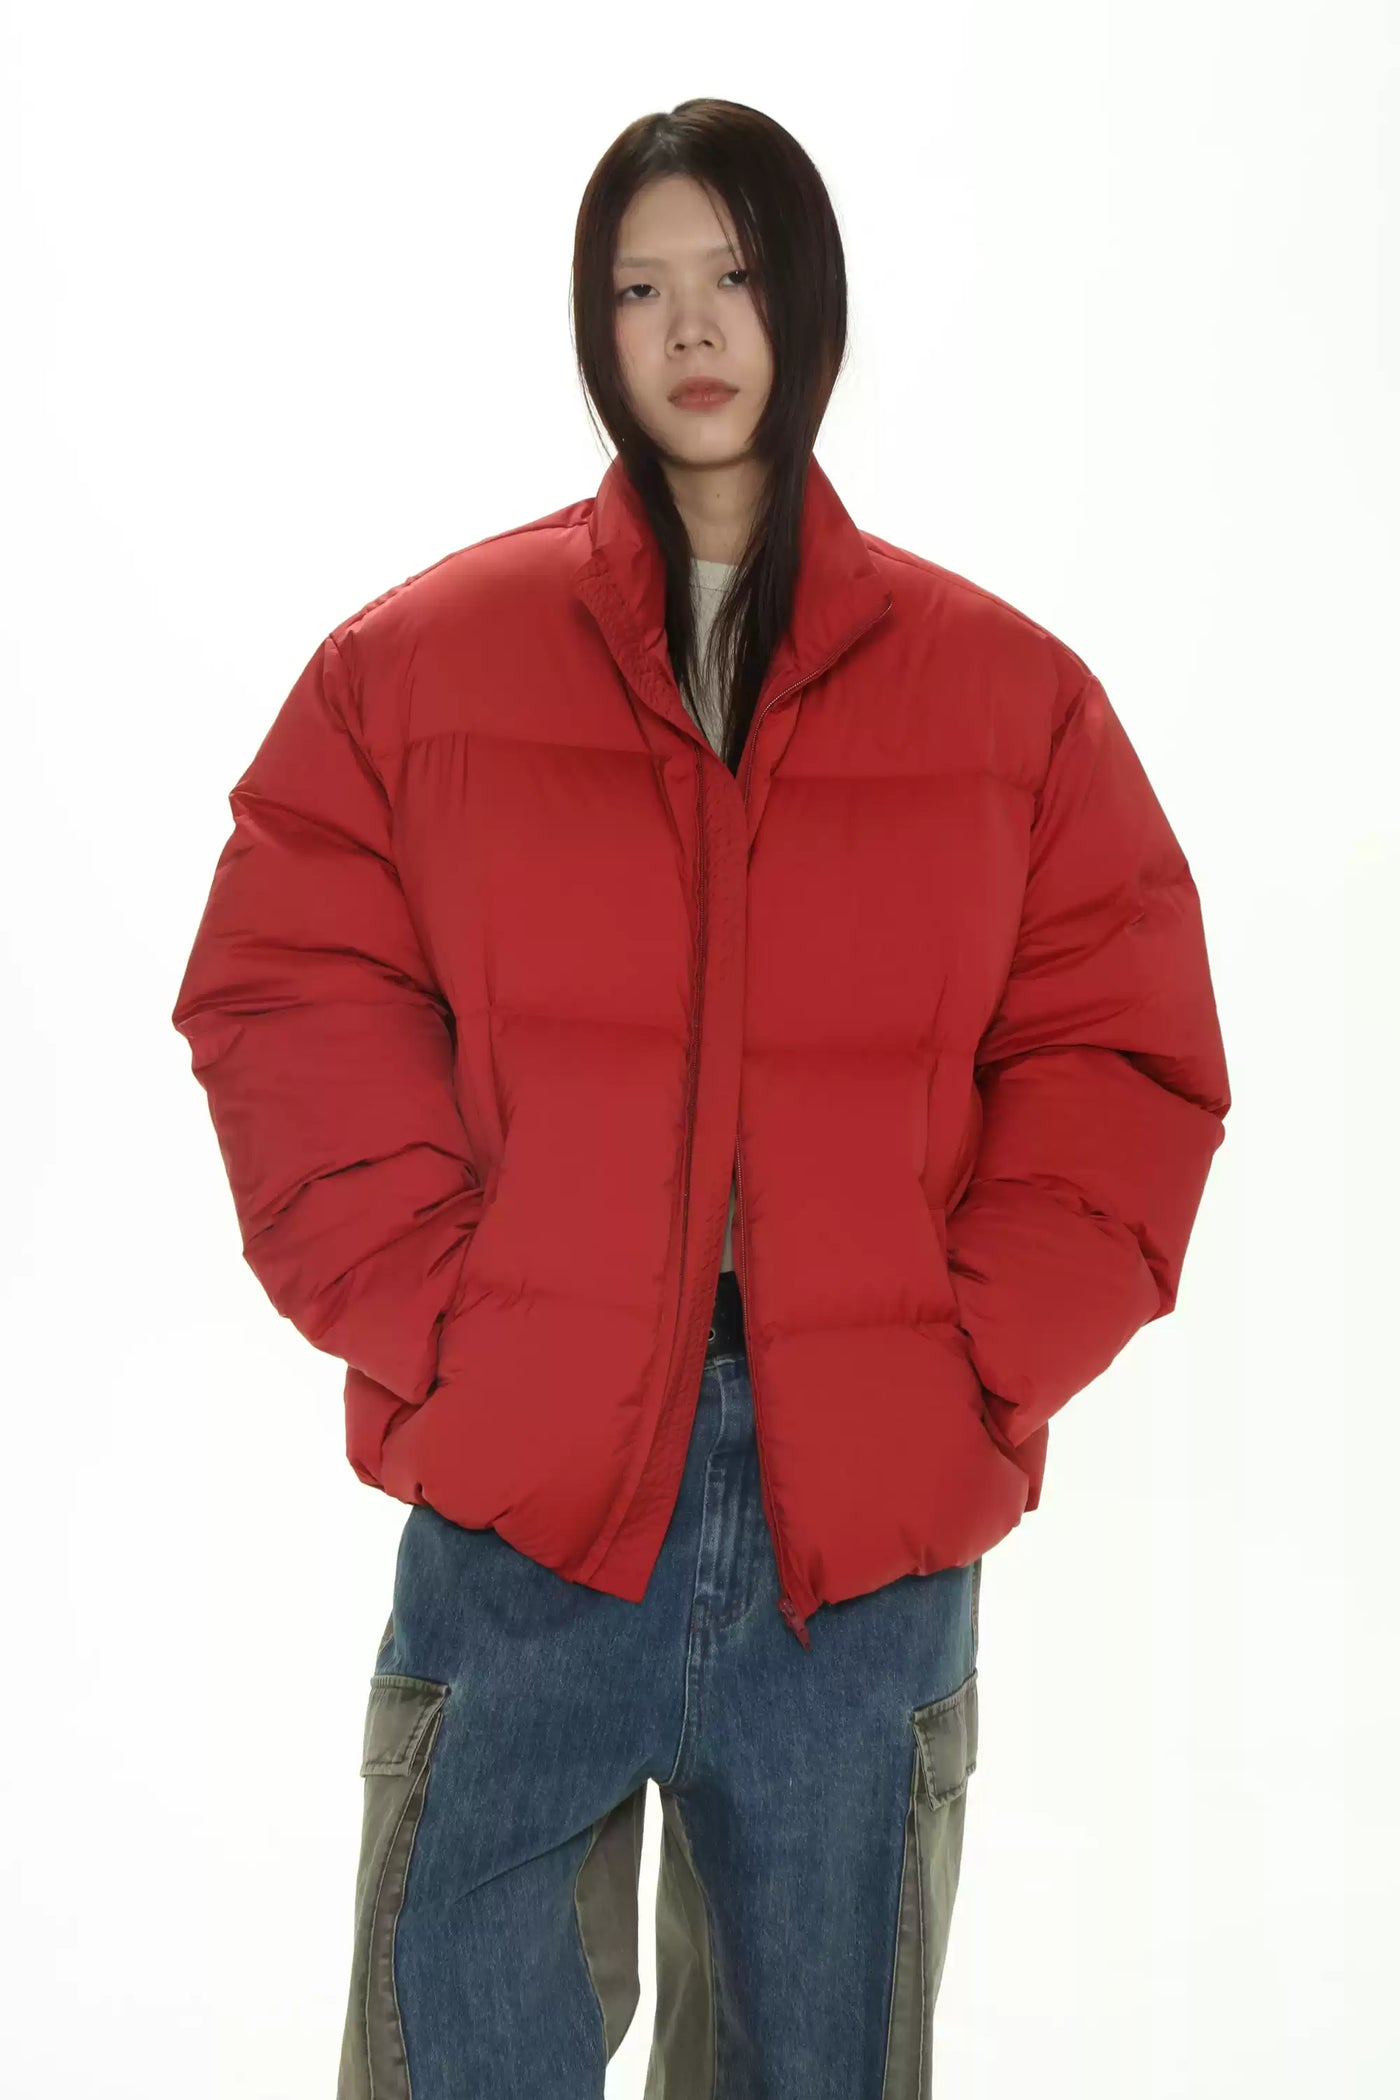 Solid Color Thick Puffer Jacket Korean Street Fashion Jacket By Mason Prince Shop Online at OH Vault